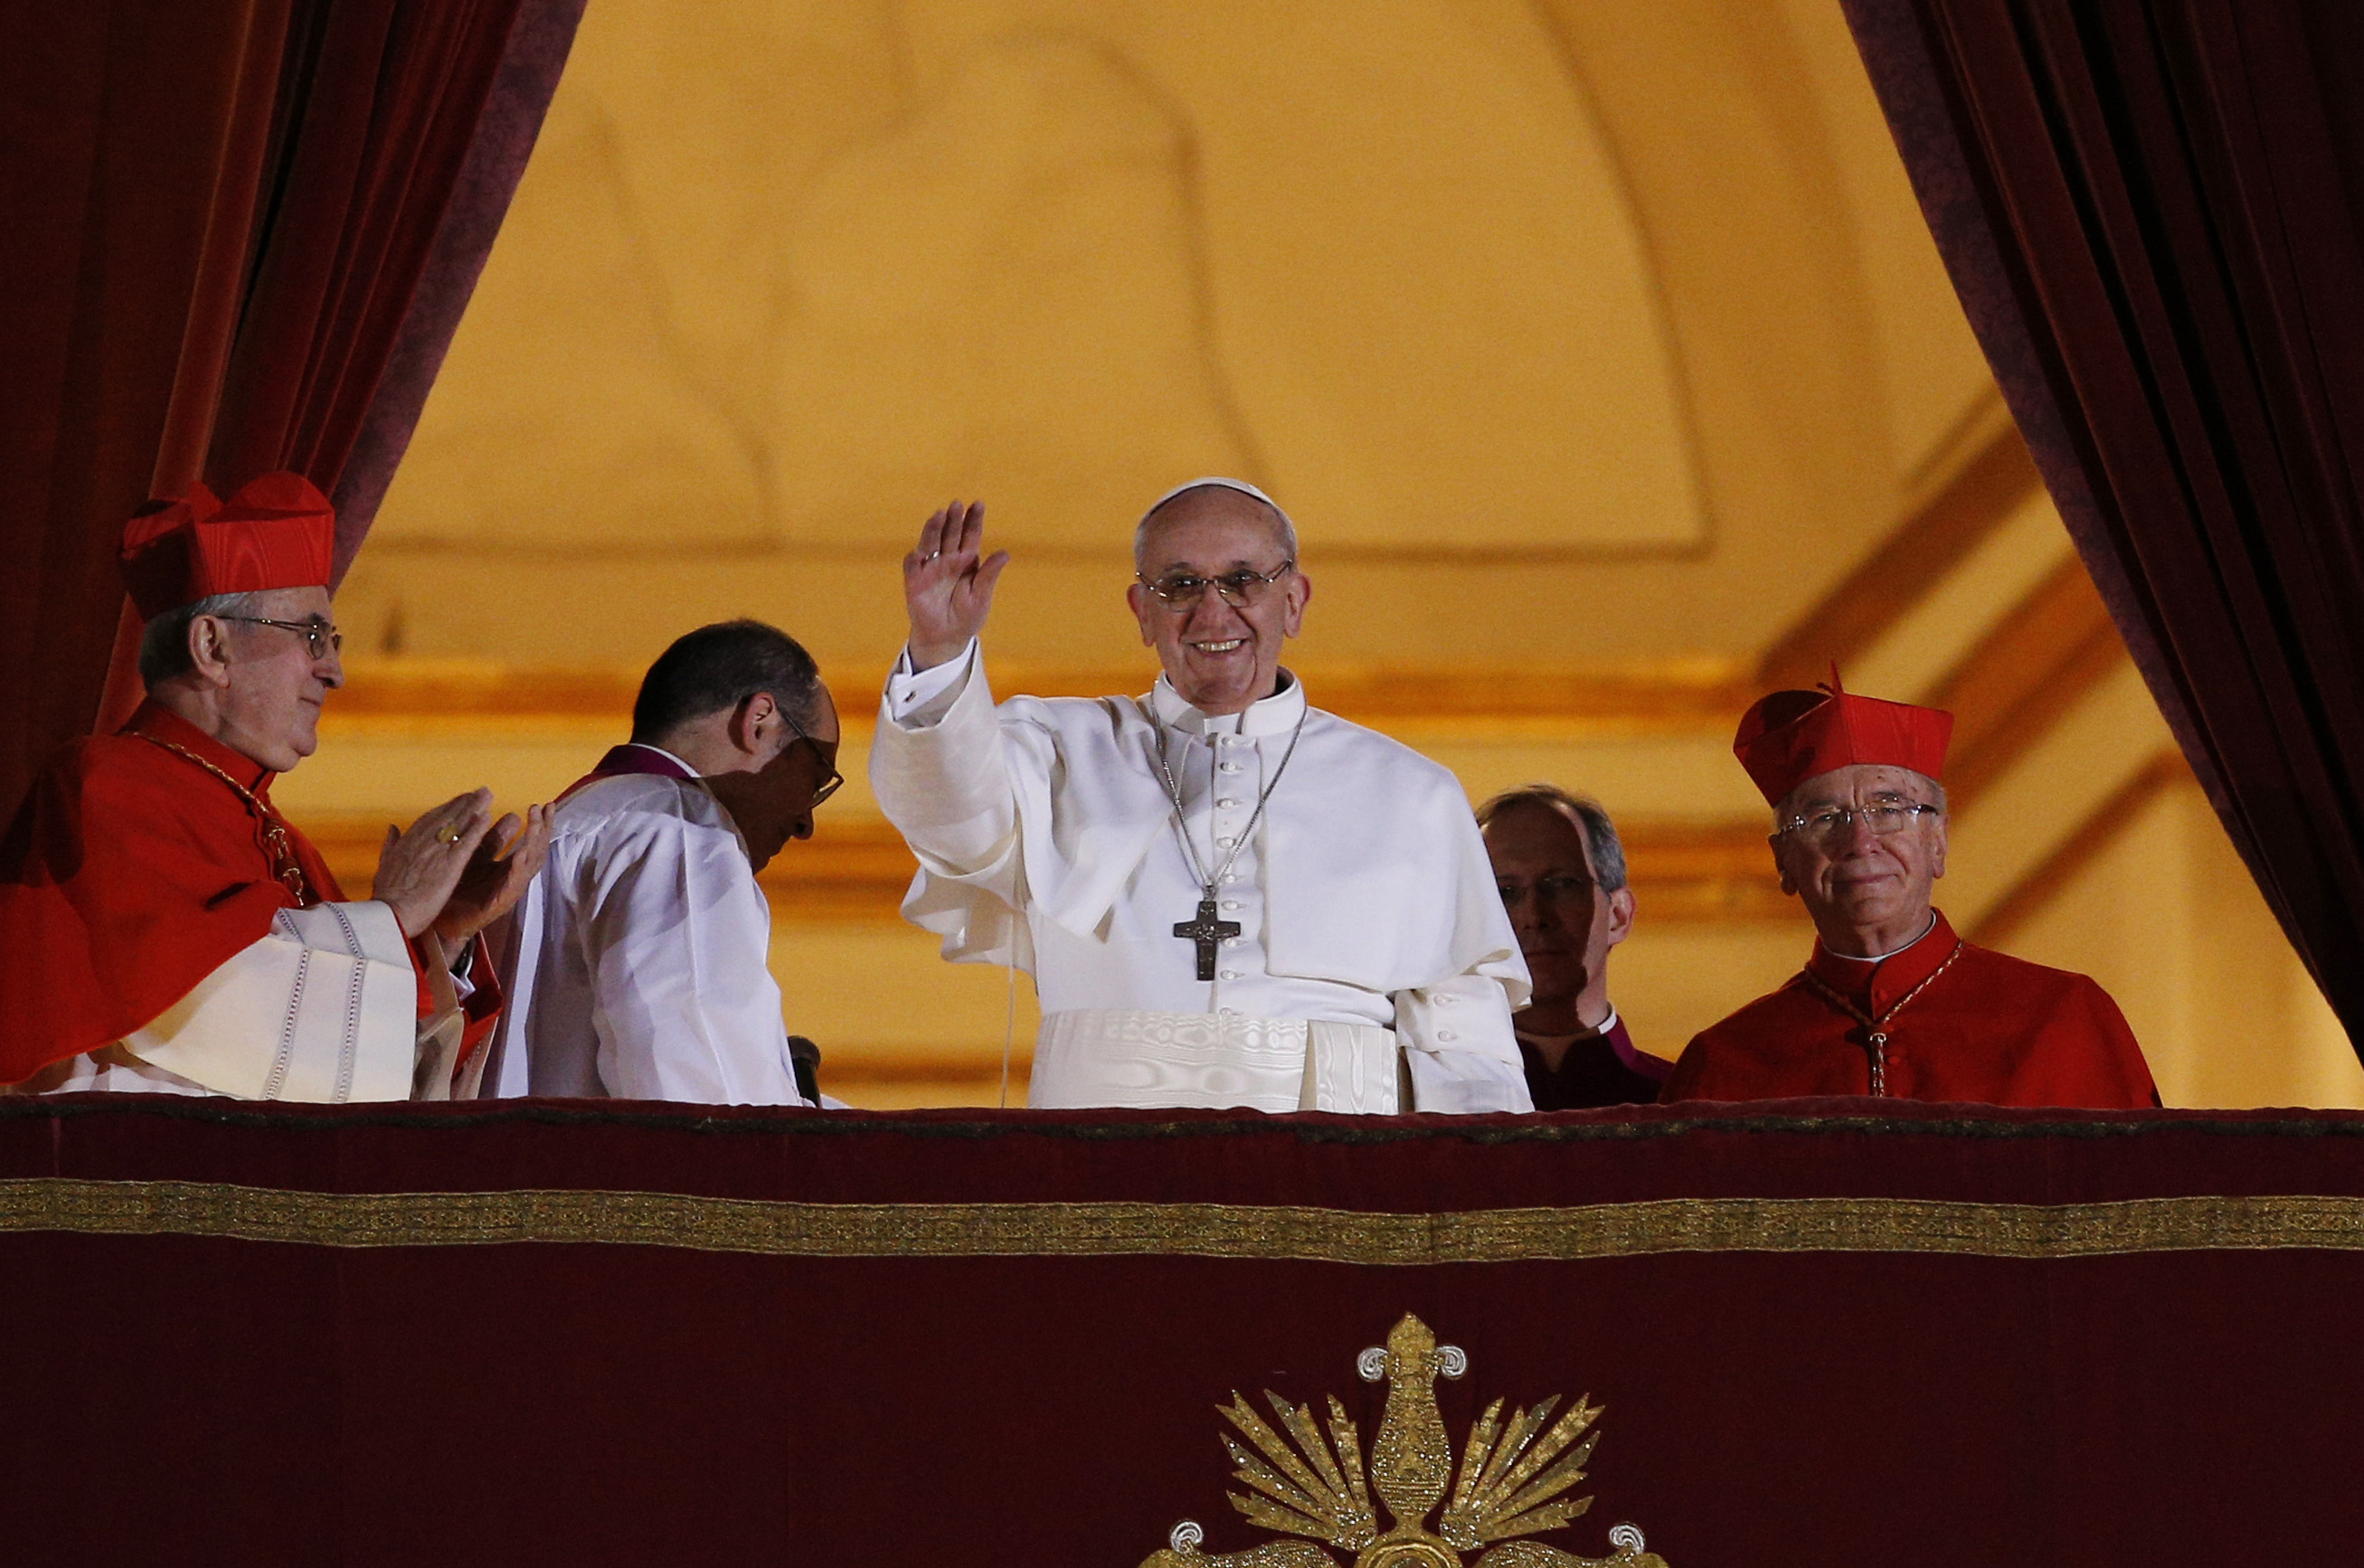  Pope Francis waves from the central balcony of St. Peter's Basilica following his election March 13, 2013.